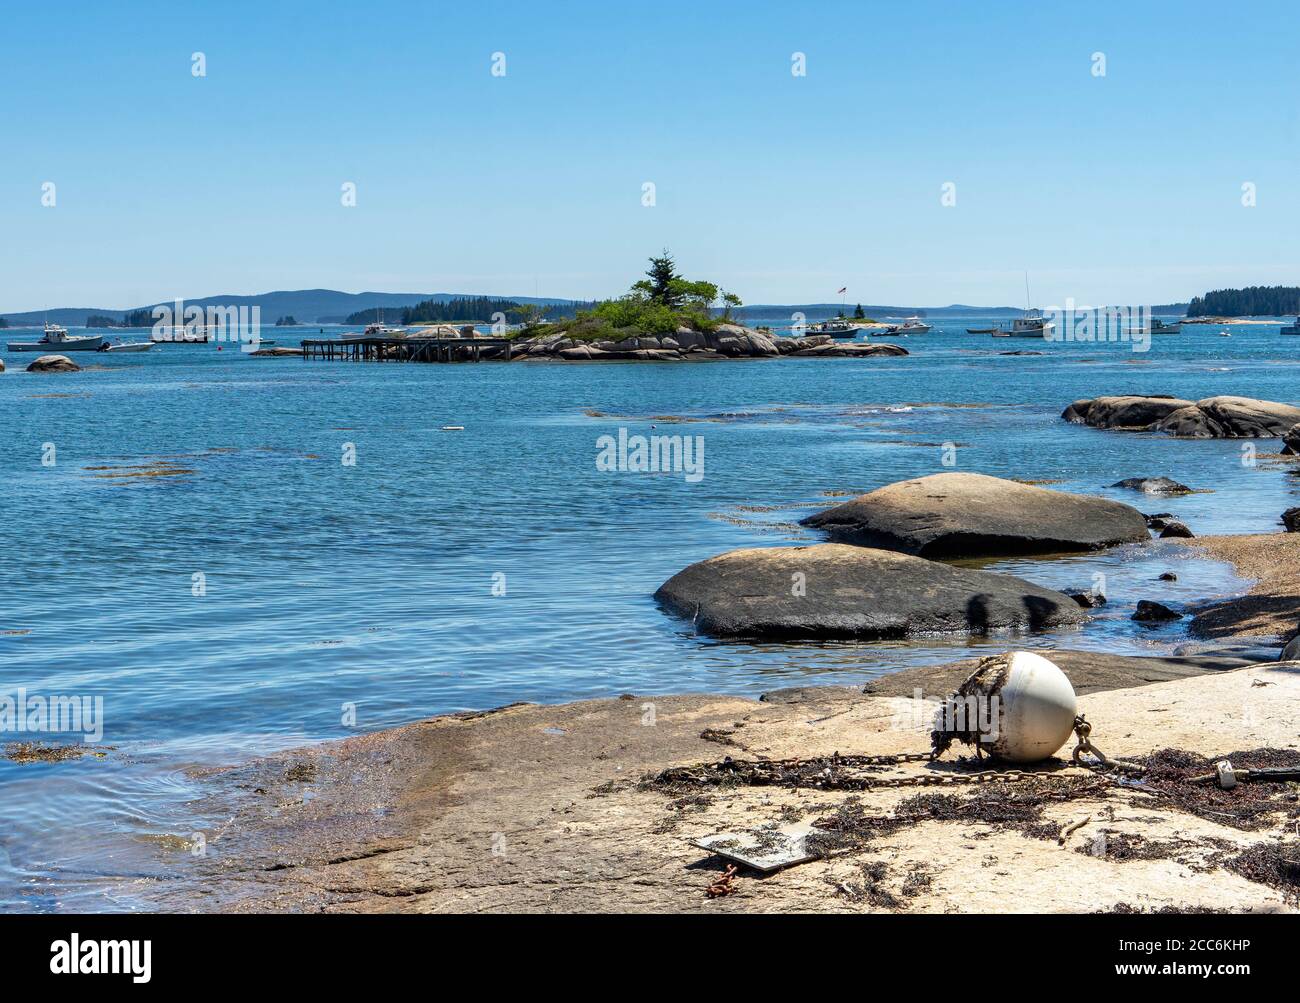 View of boats in the Stonington cove.  The photo was taken from shore looking onto water Stock Photo